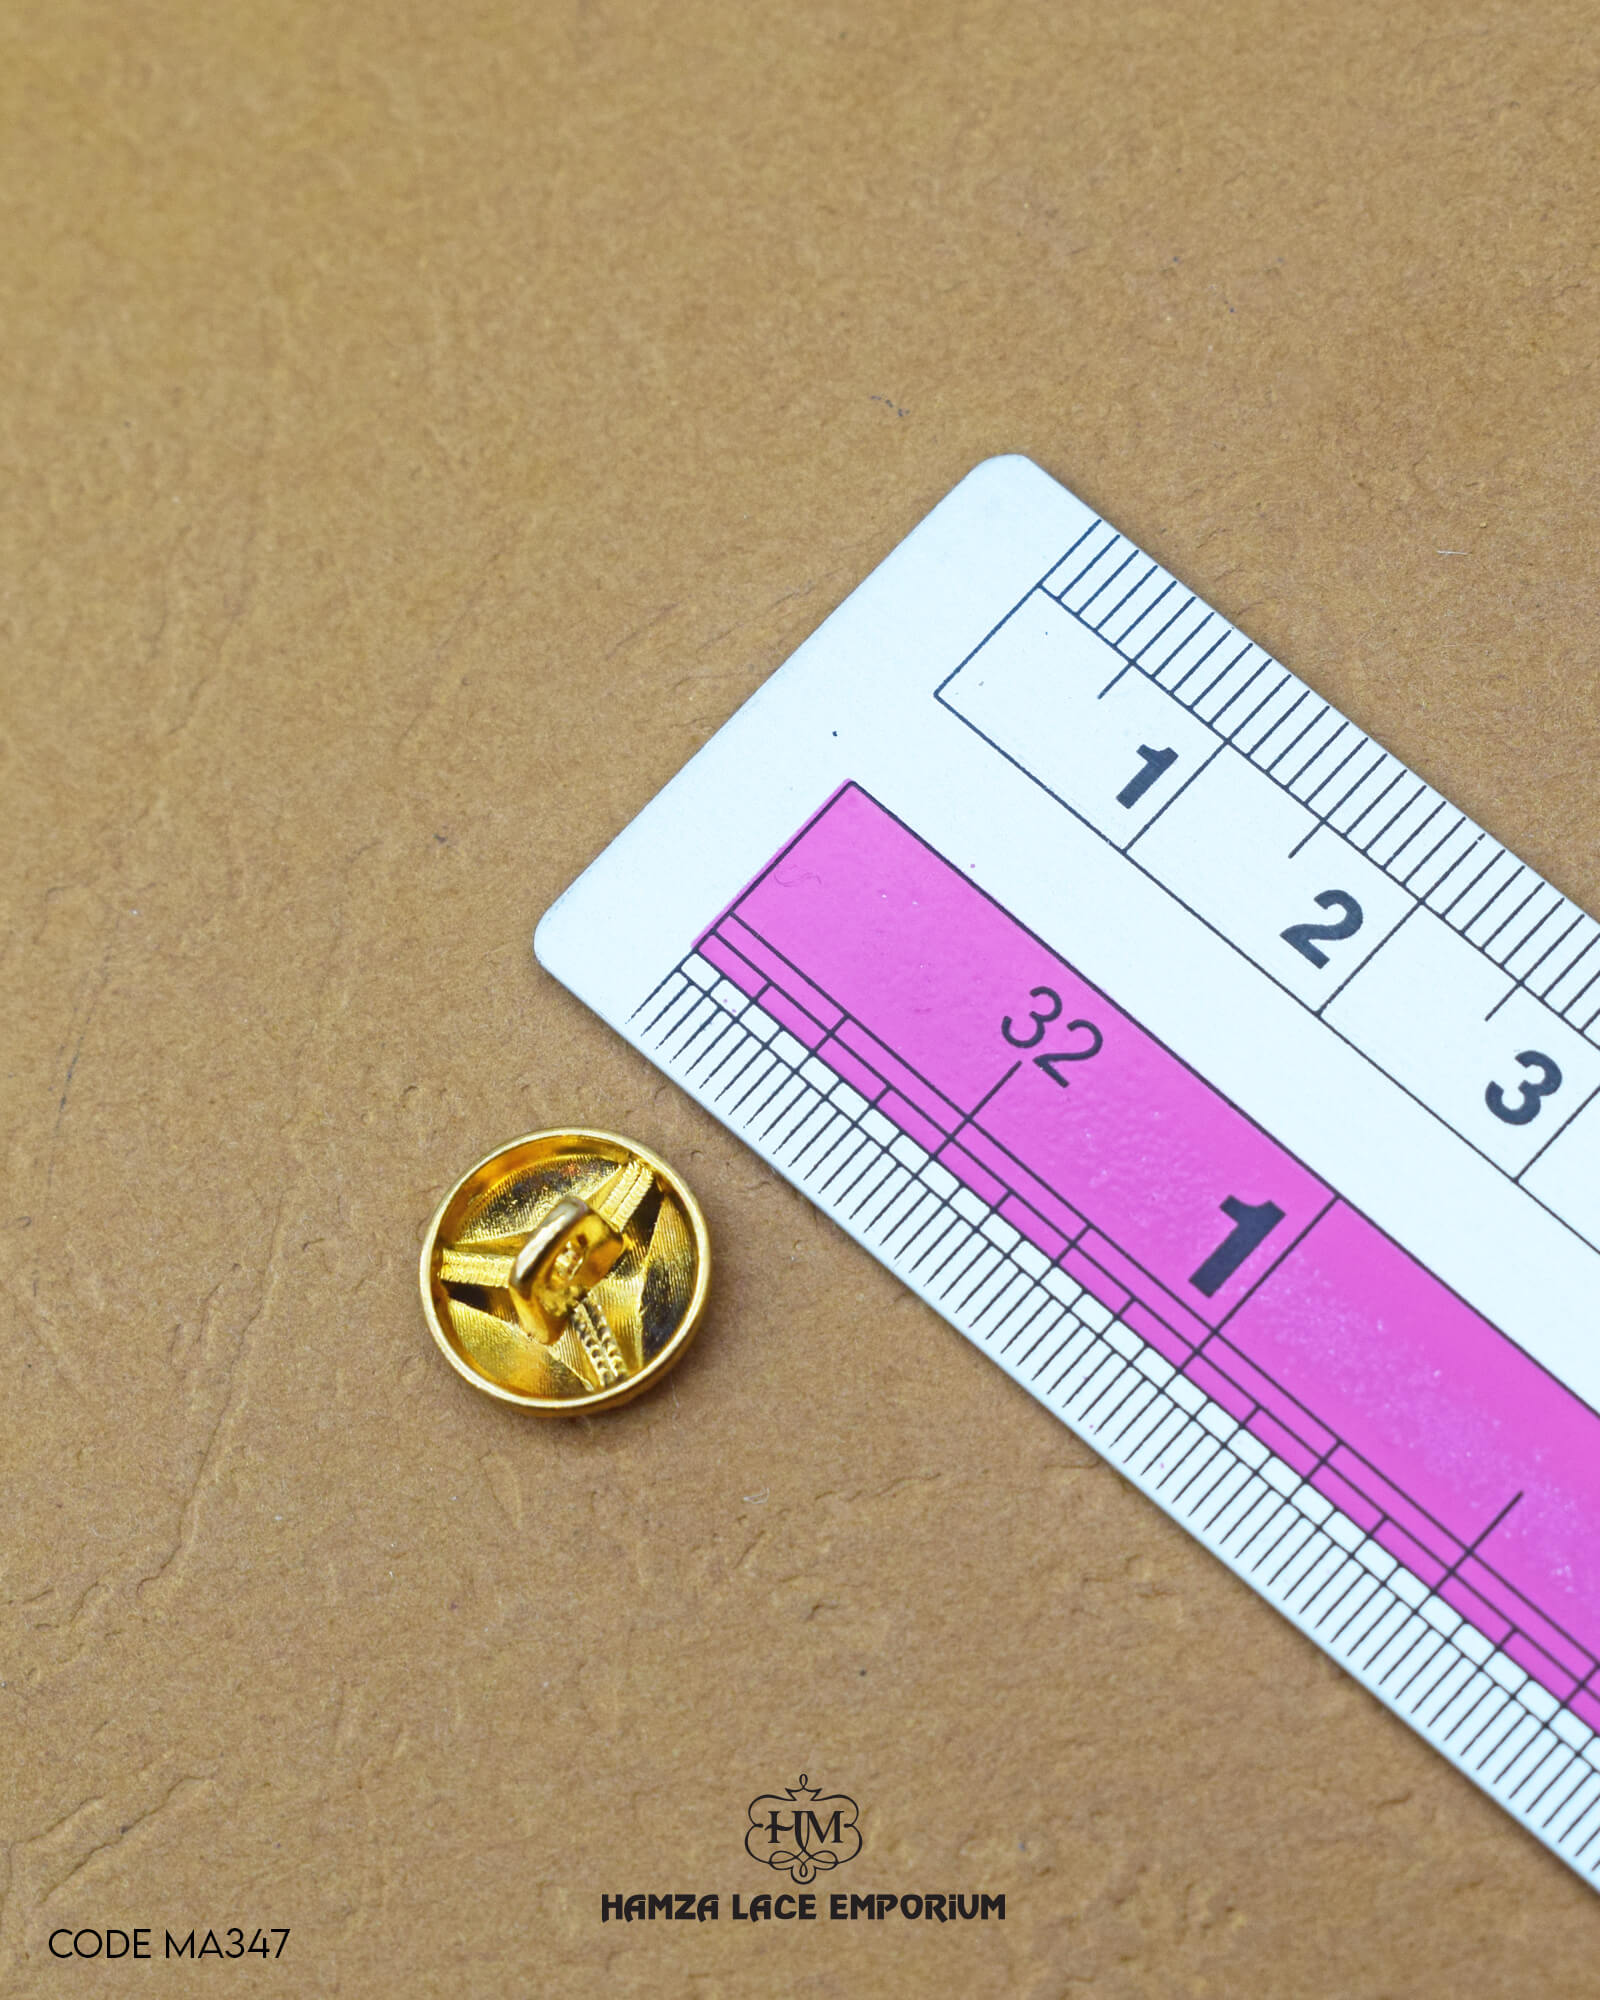 The size of the 'Golden Metal Button MB347 Media 2 of 2' is measured using a ruler.